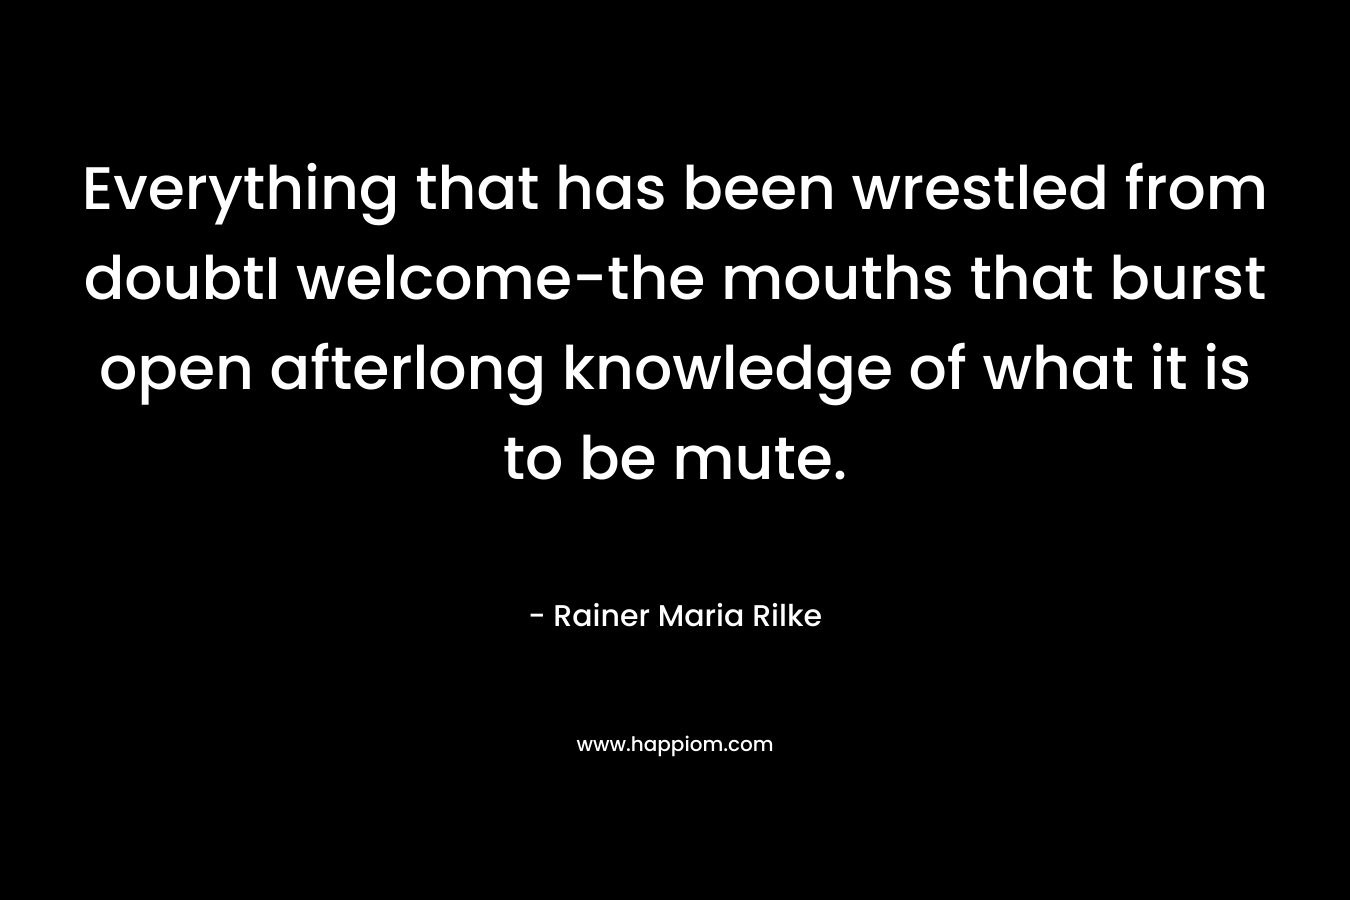 Everything that has been wrestled from doubtI welcome-the mouths that burst open afterlong knowledge of what it is to be mute. – Rainer Maria Rilke